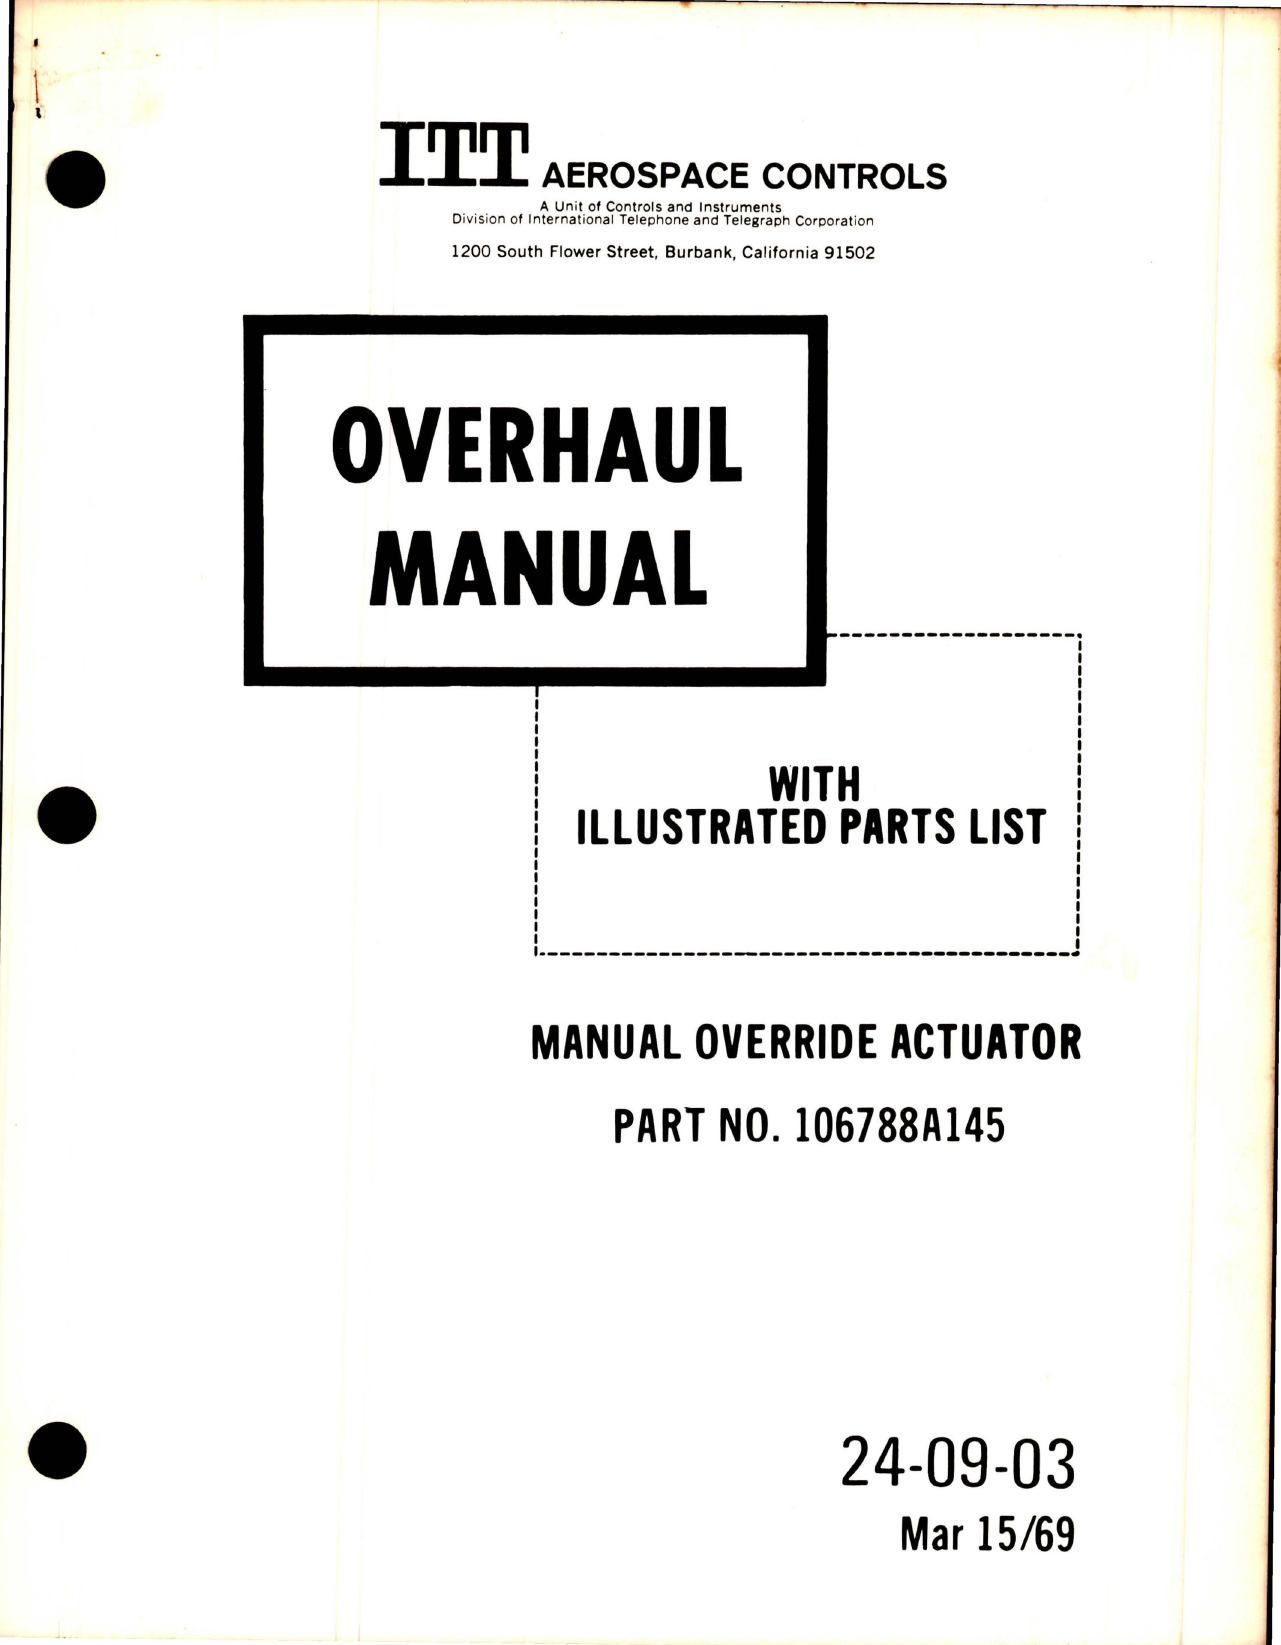 Sample page 1 from AirCorps Library document: Overhaul Instructions with Parts Lists for Manual Override Actuator - Part 106788A145